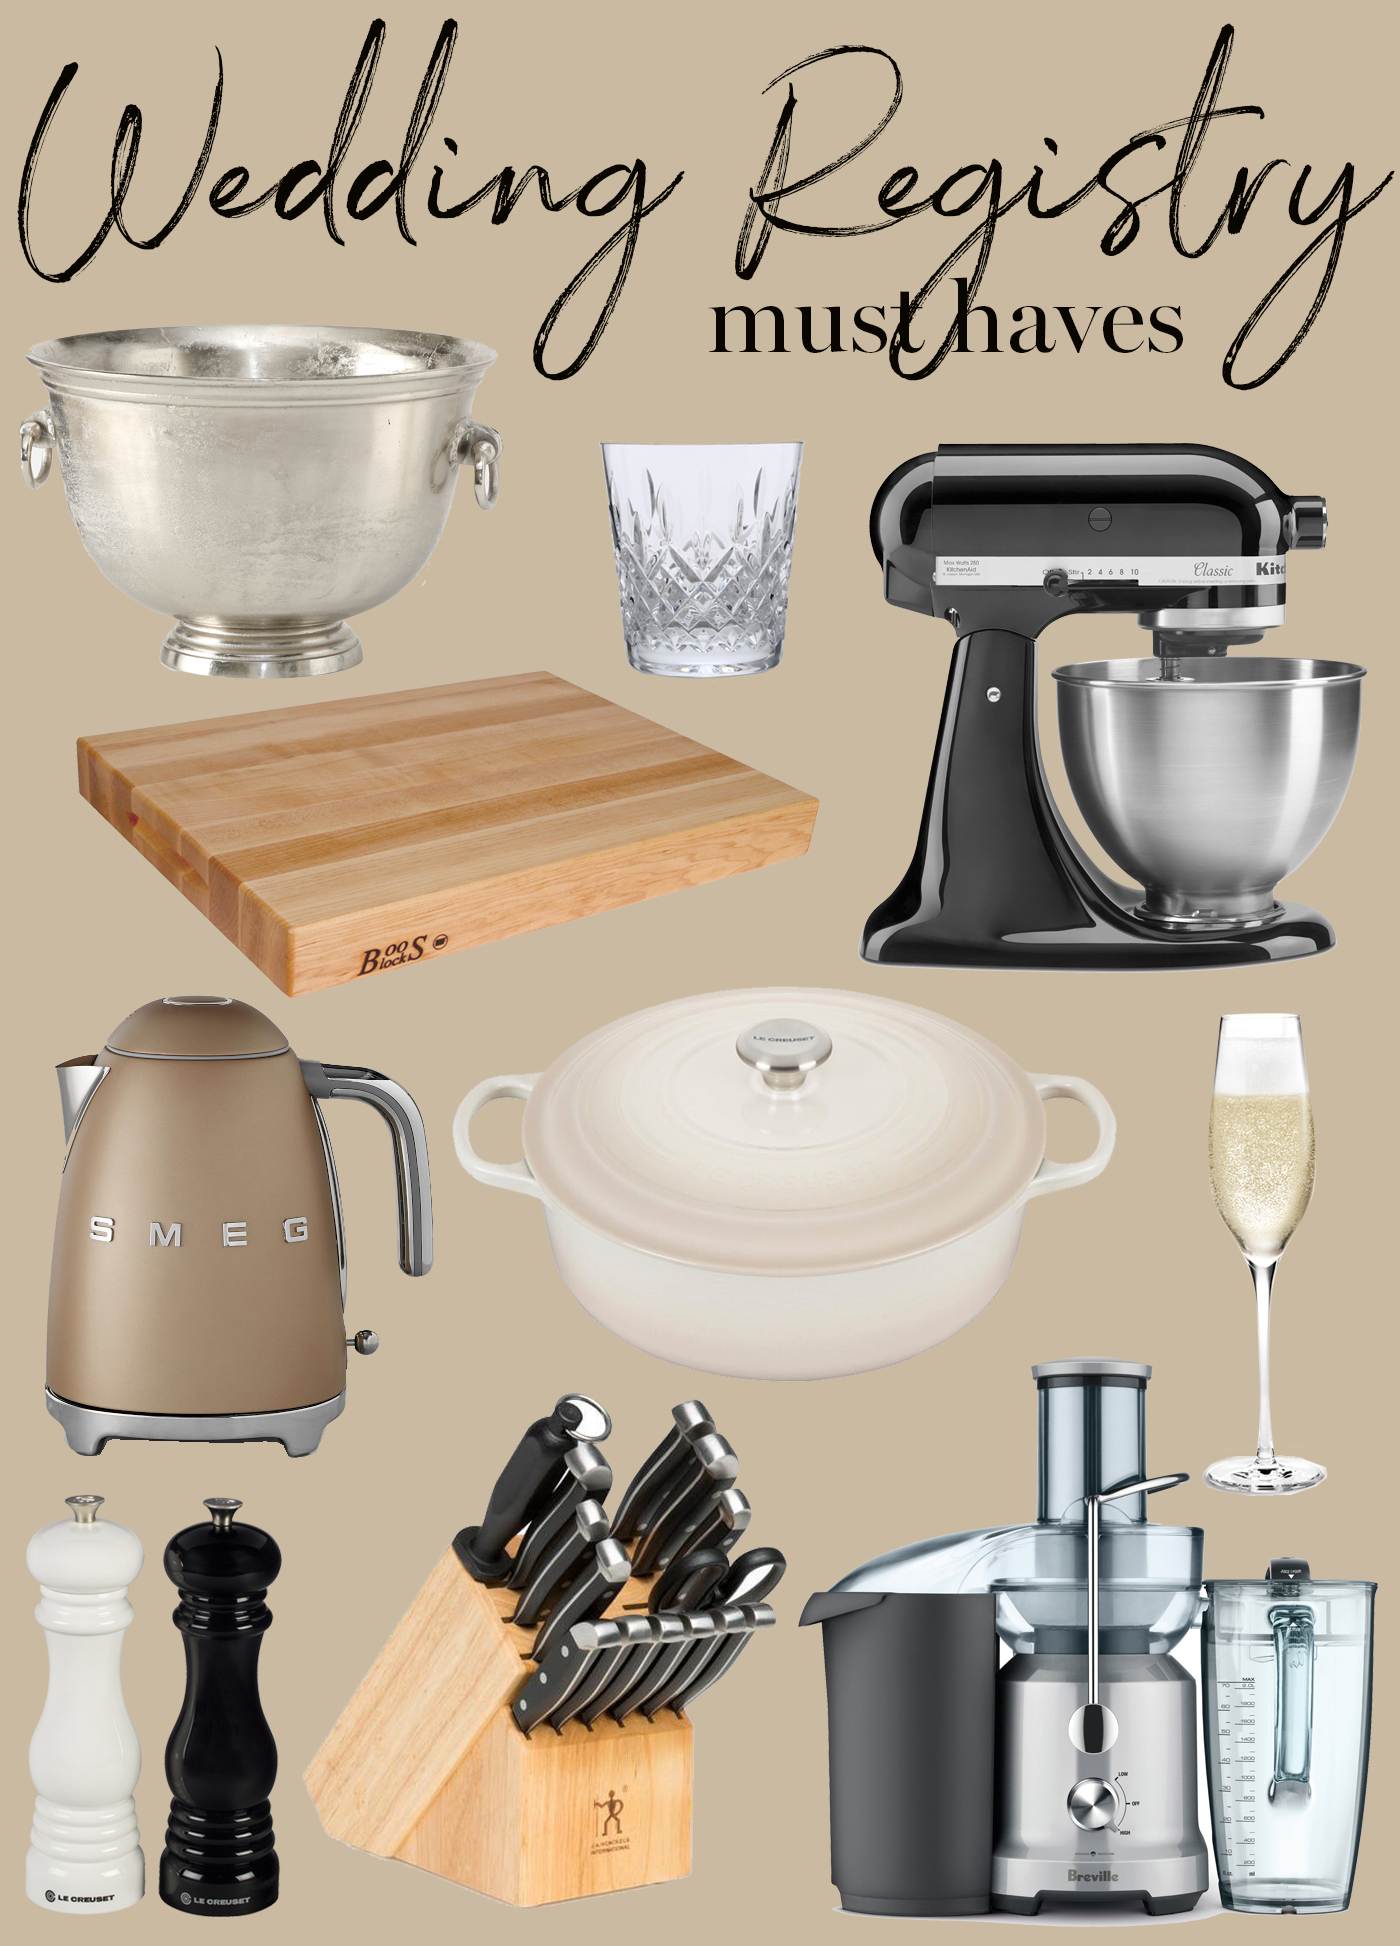 Best Wedding Registry Items - With Love From Kat